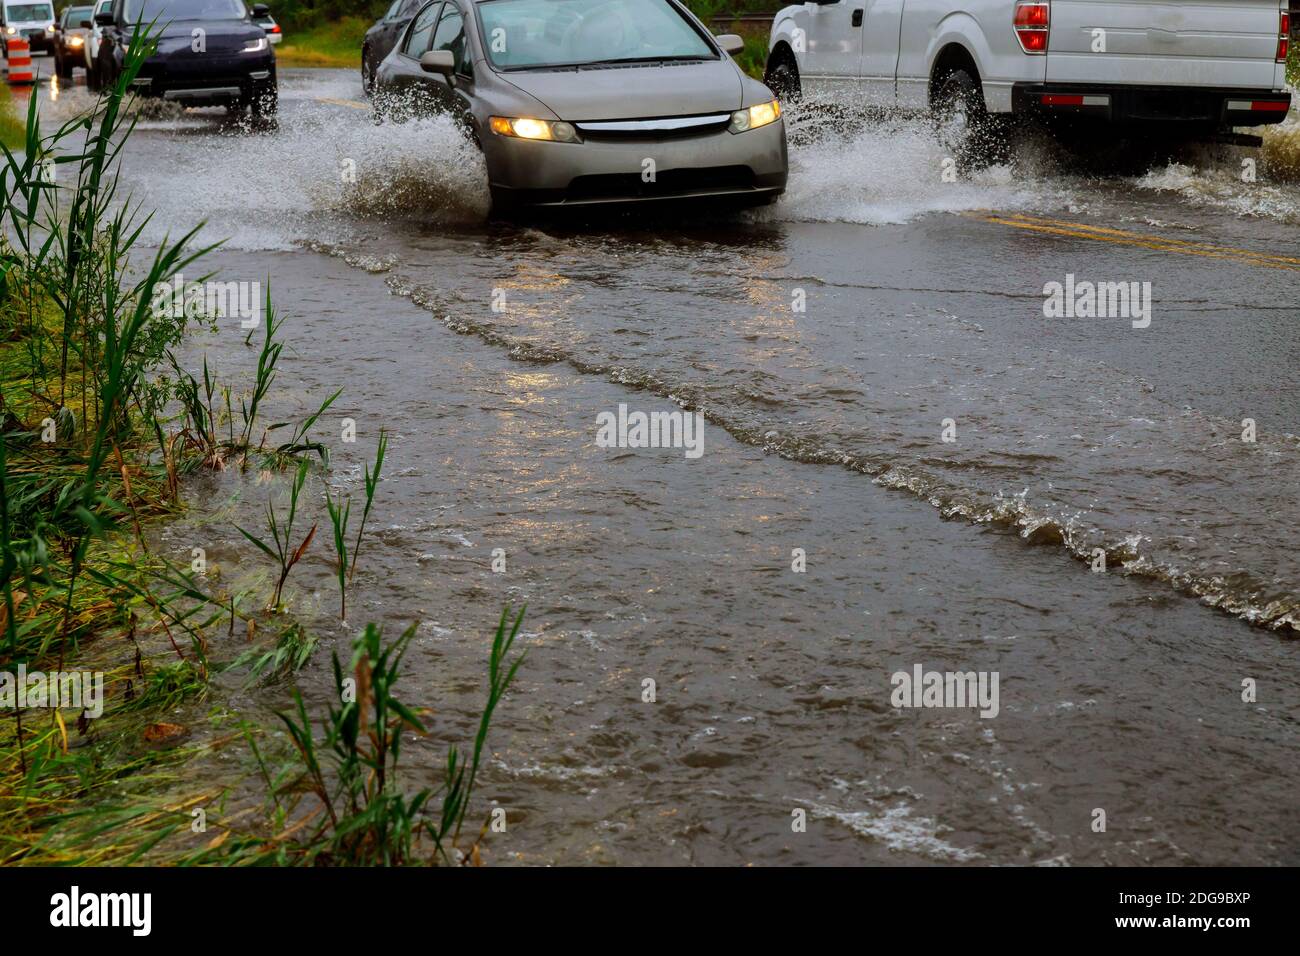 Car driving through flood water on the road during monsoon season Stock Photo